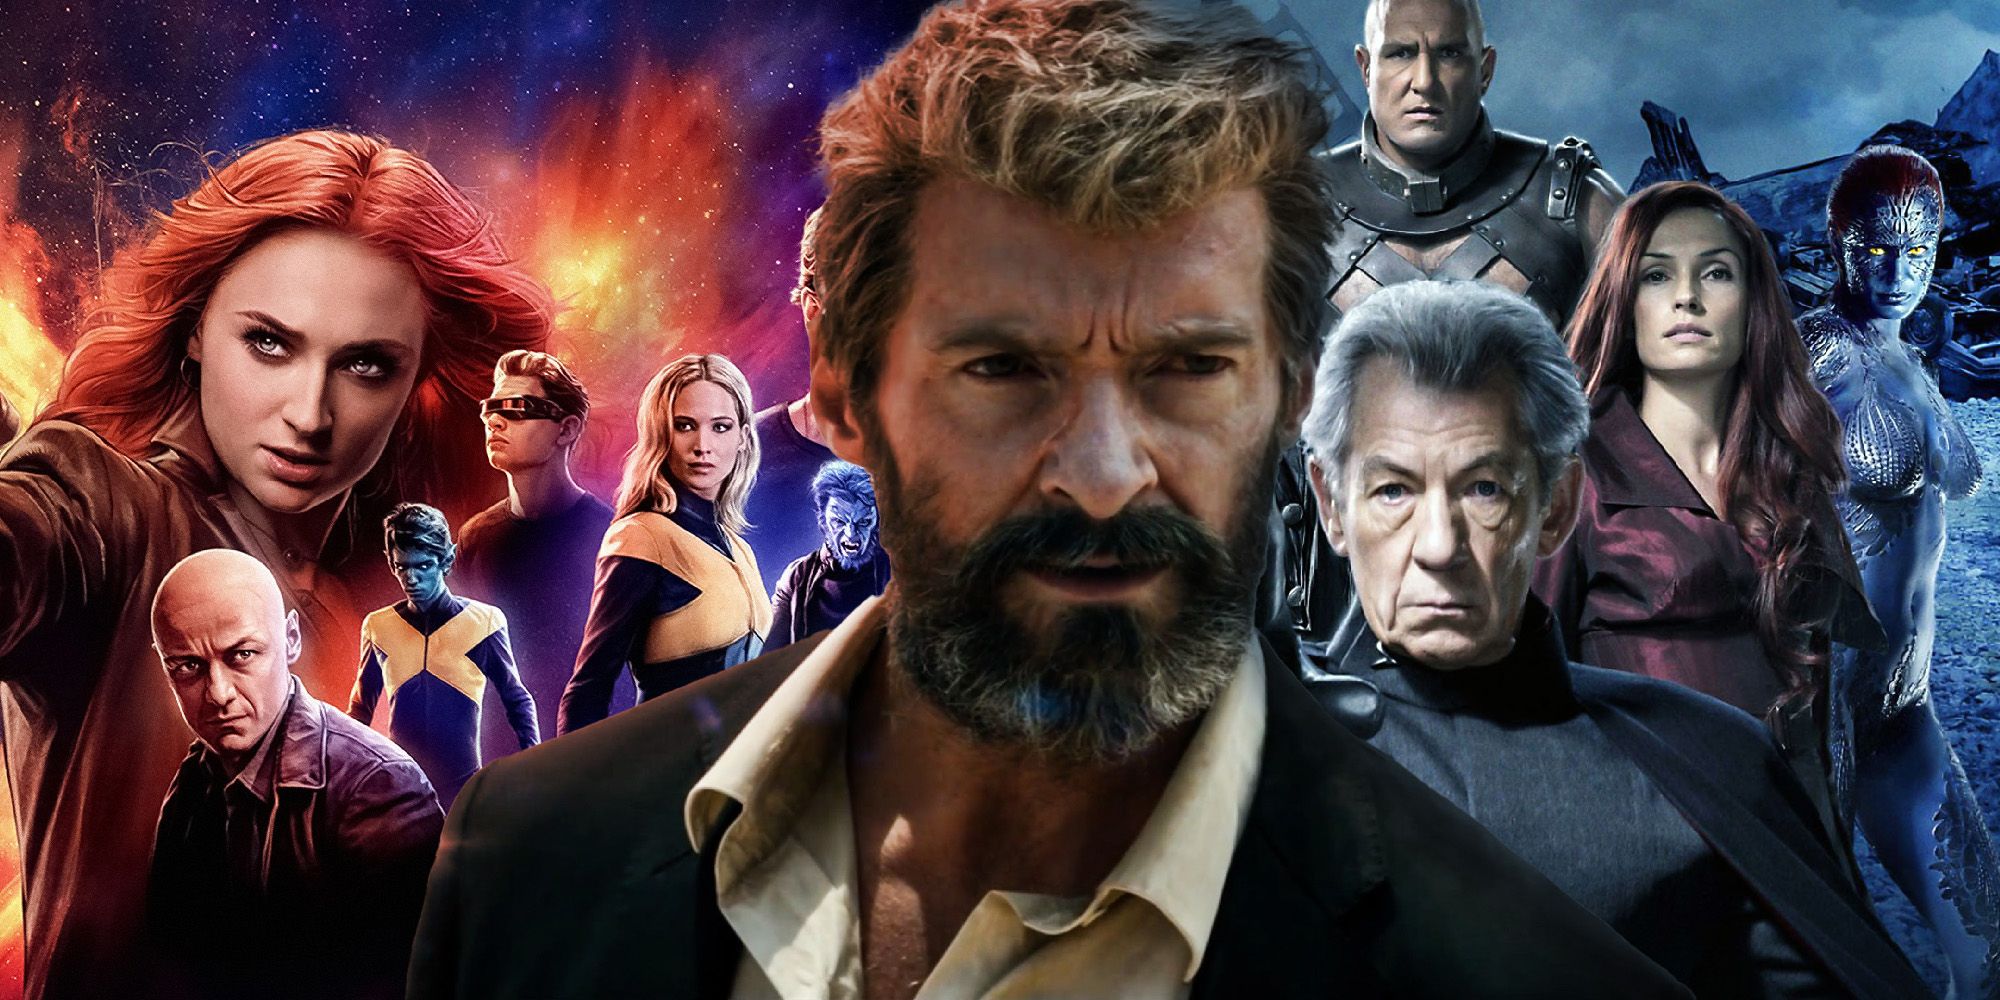 The X Men Movie Universe Never Worked Because It Focused On The Wrong Characters